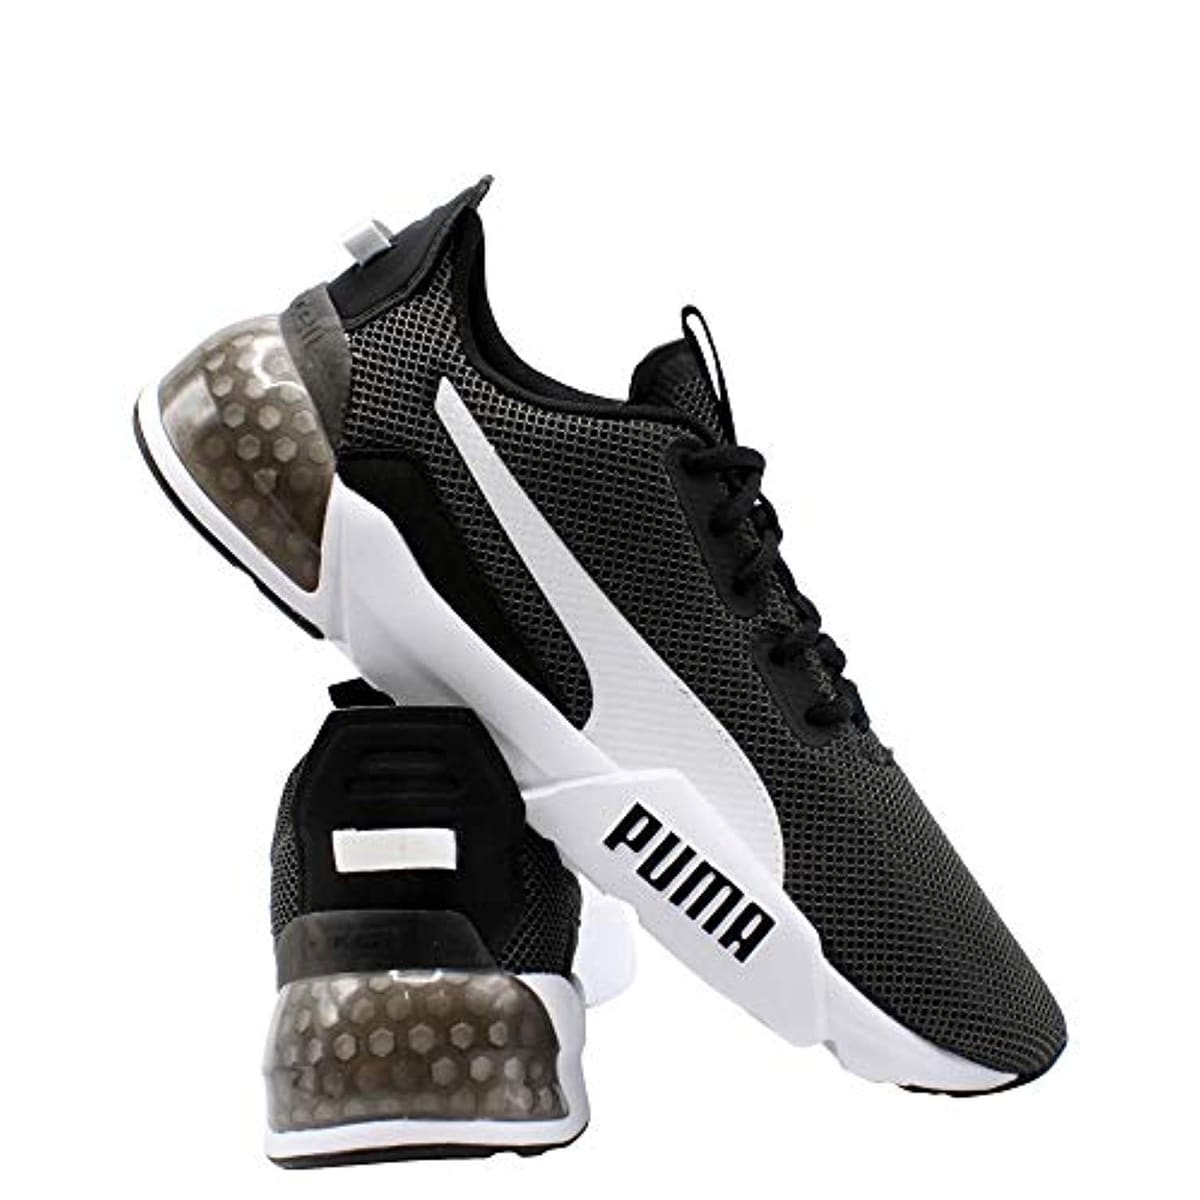 puma cell phase review